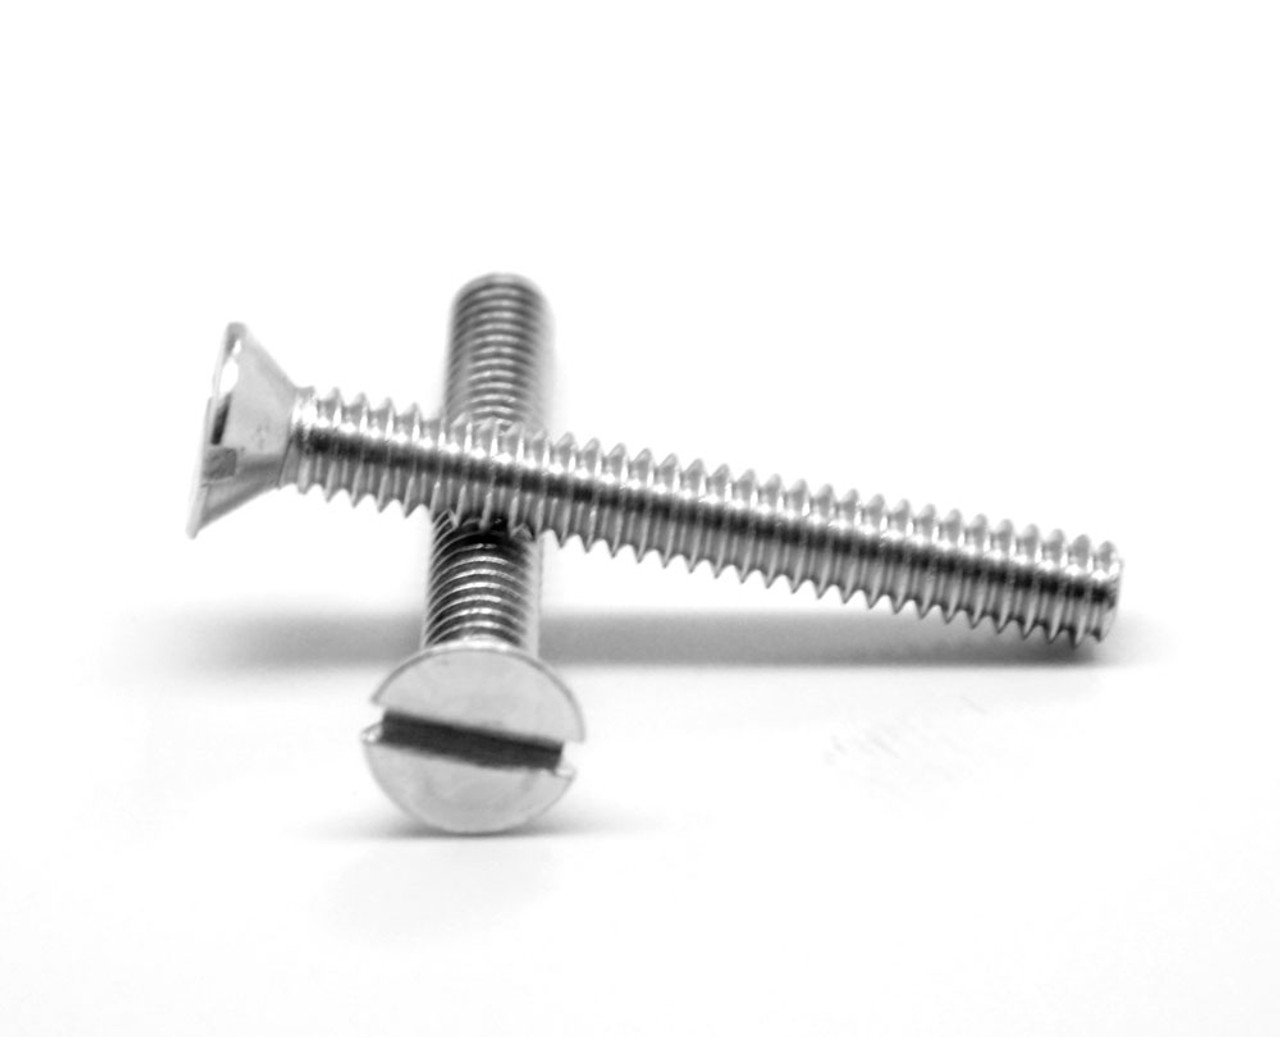 #10-24 x 9/16" (FT) Coarse Thread Machine Screw Slotted Flat Head Stainless Steel 18-8